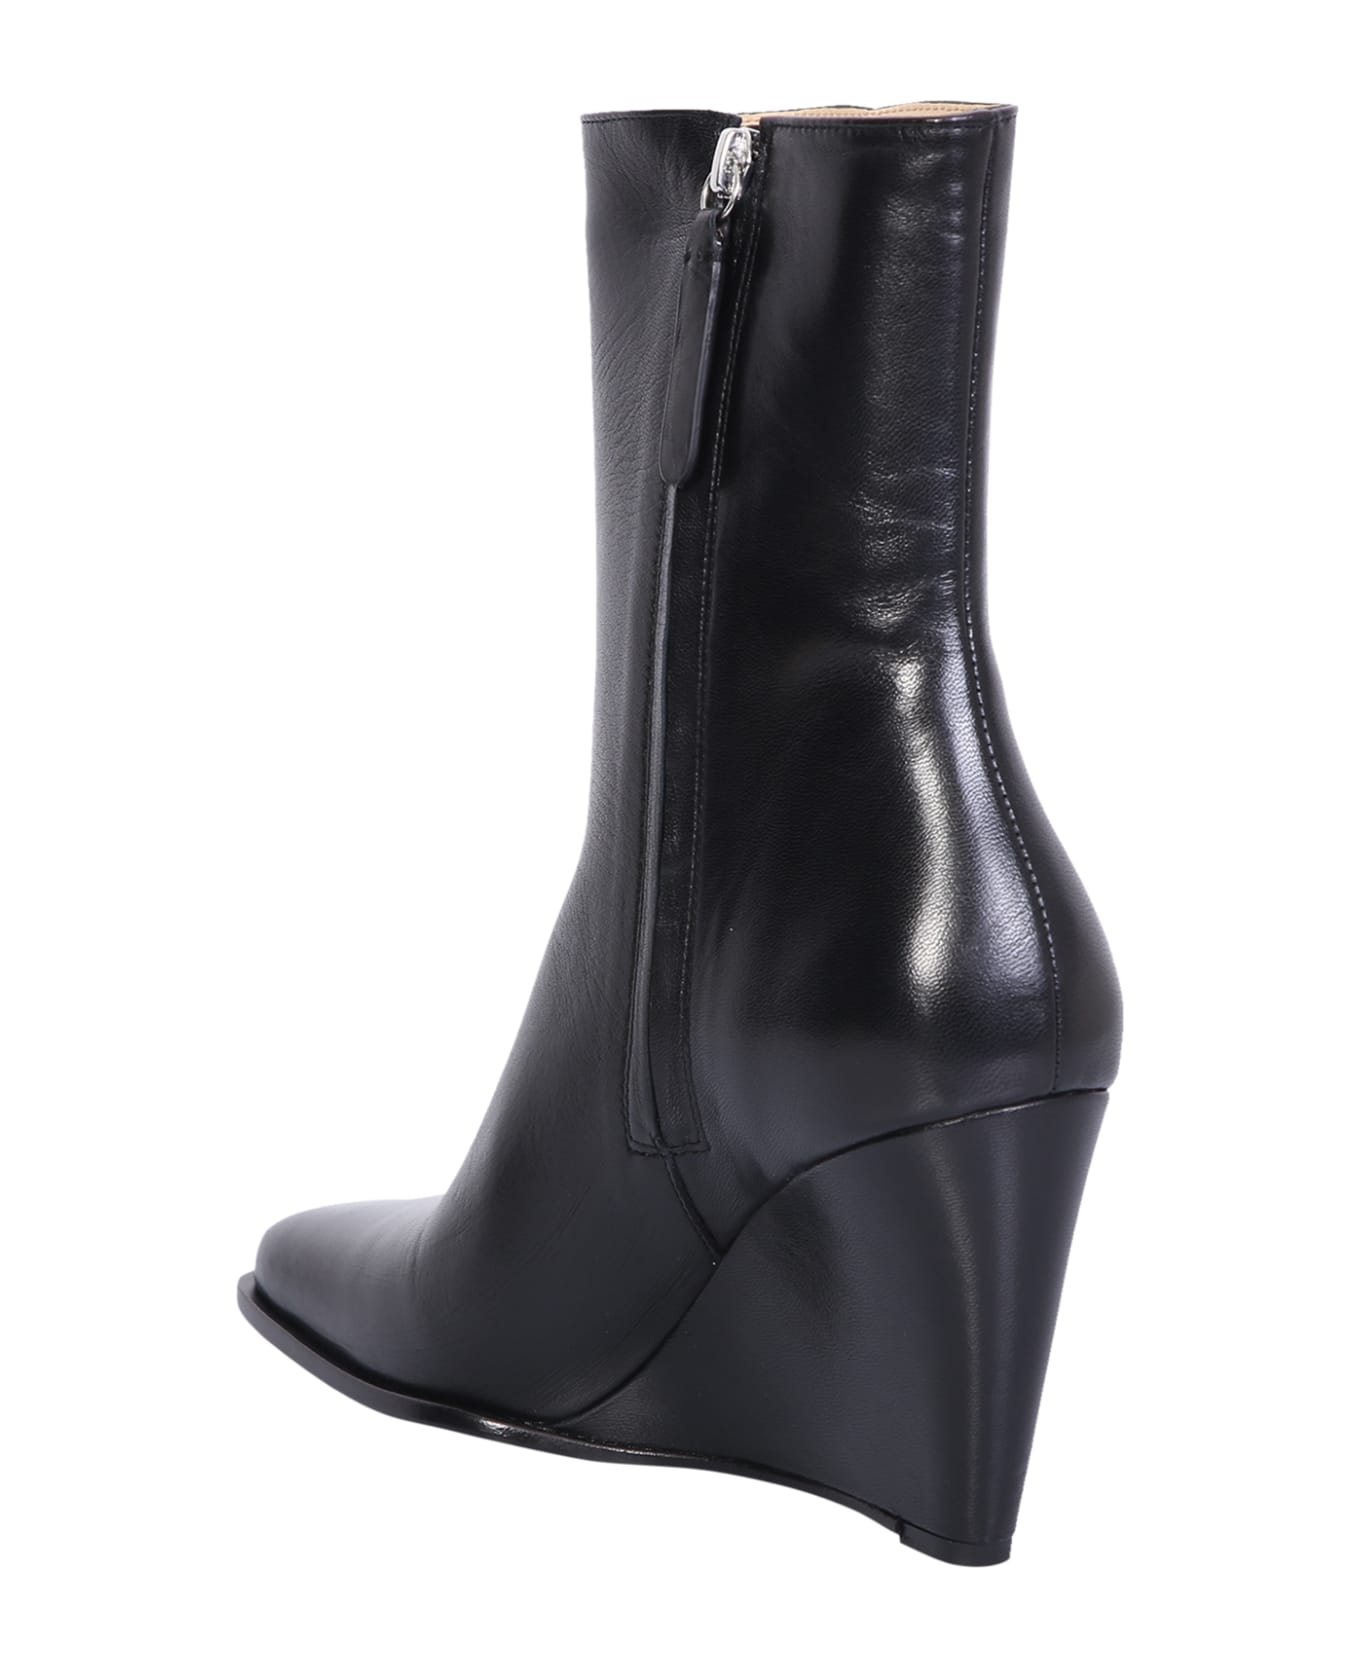 Wandler Gaia Ankle Boots - Black